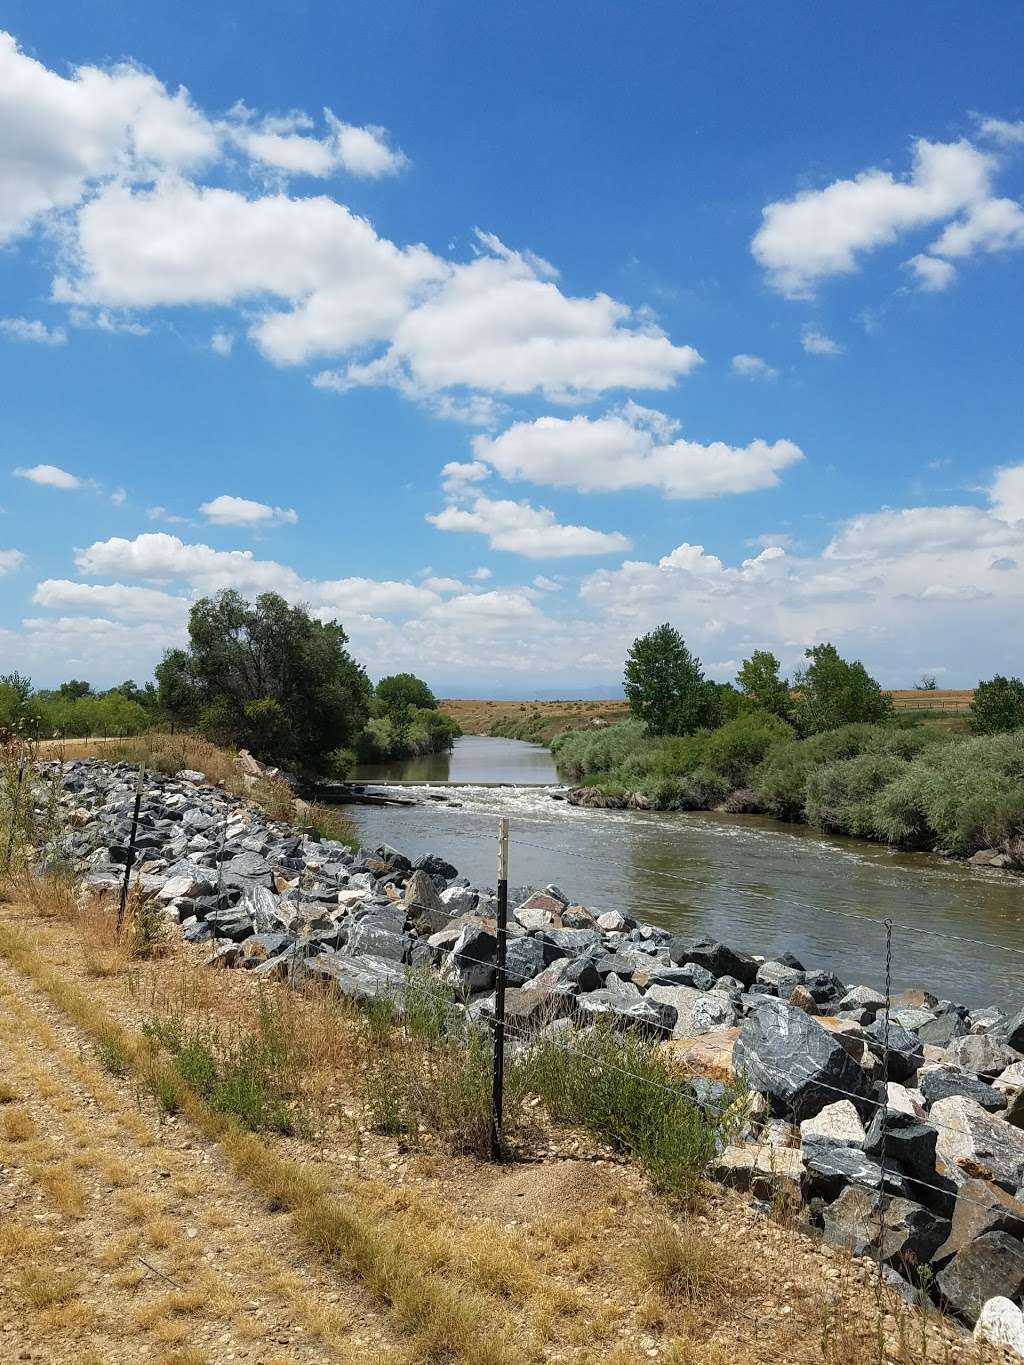 St. Vrain State Park | 3785 Weld County Road 24.5, Firestone, CO 80504 | Phone: (303) 485-0186